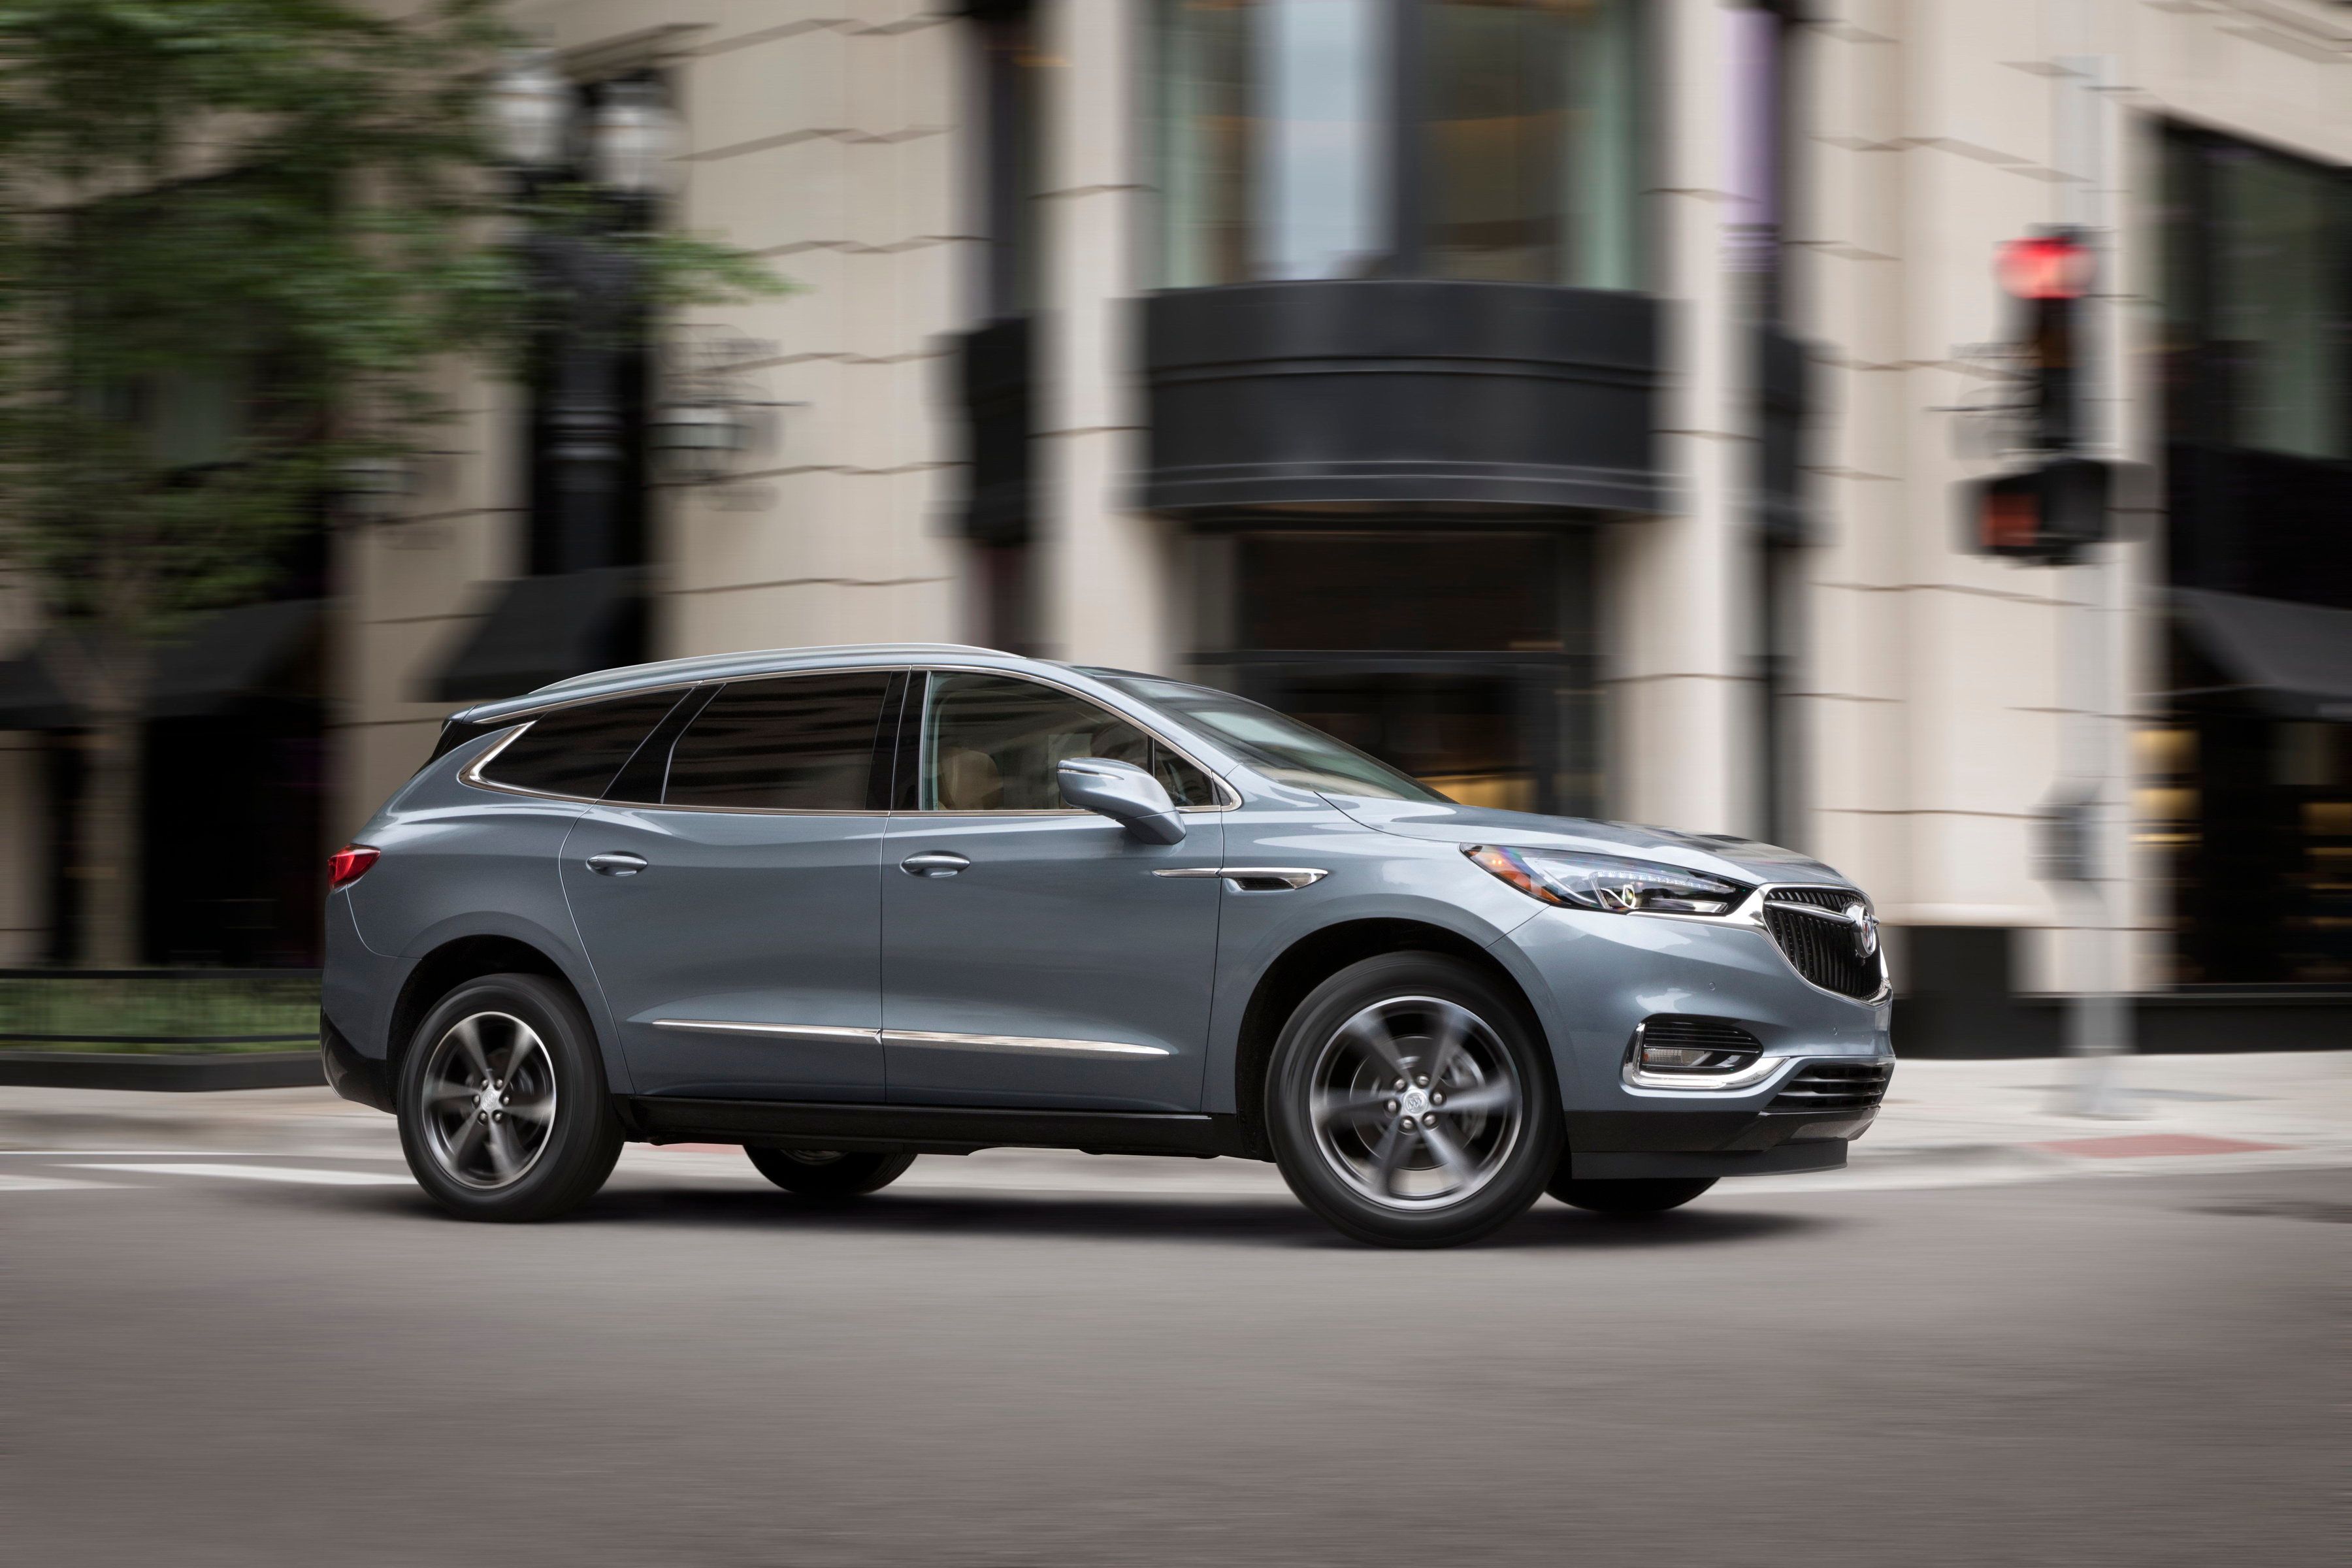 The 2018 Buick Enclave in the city.